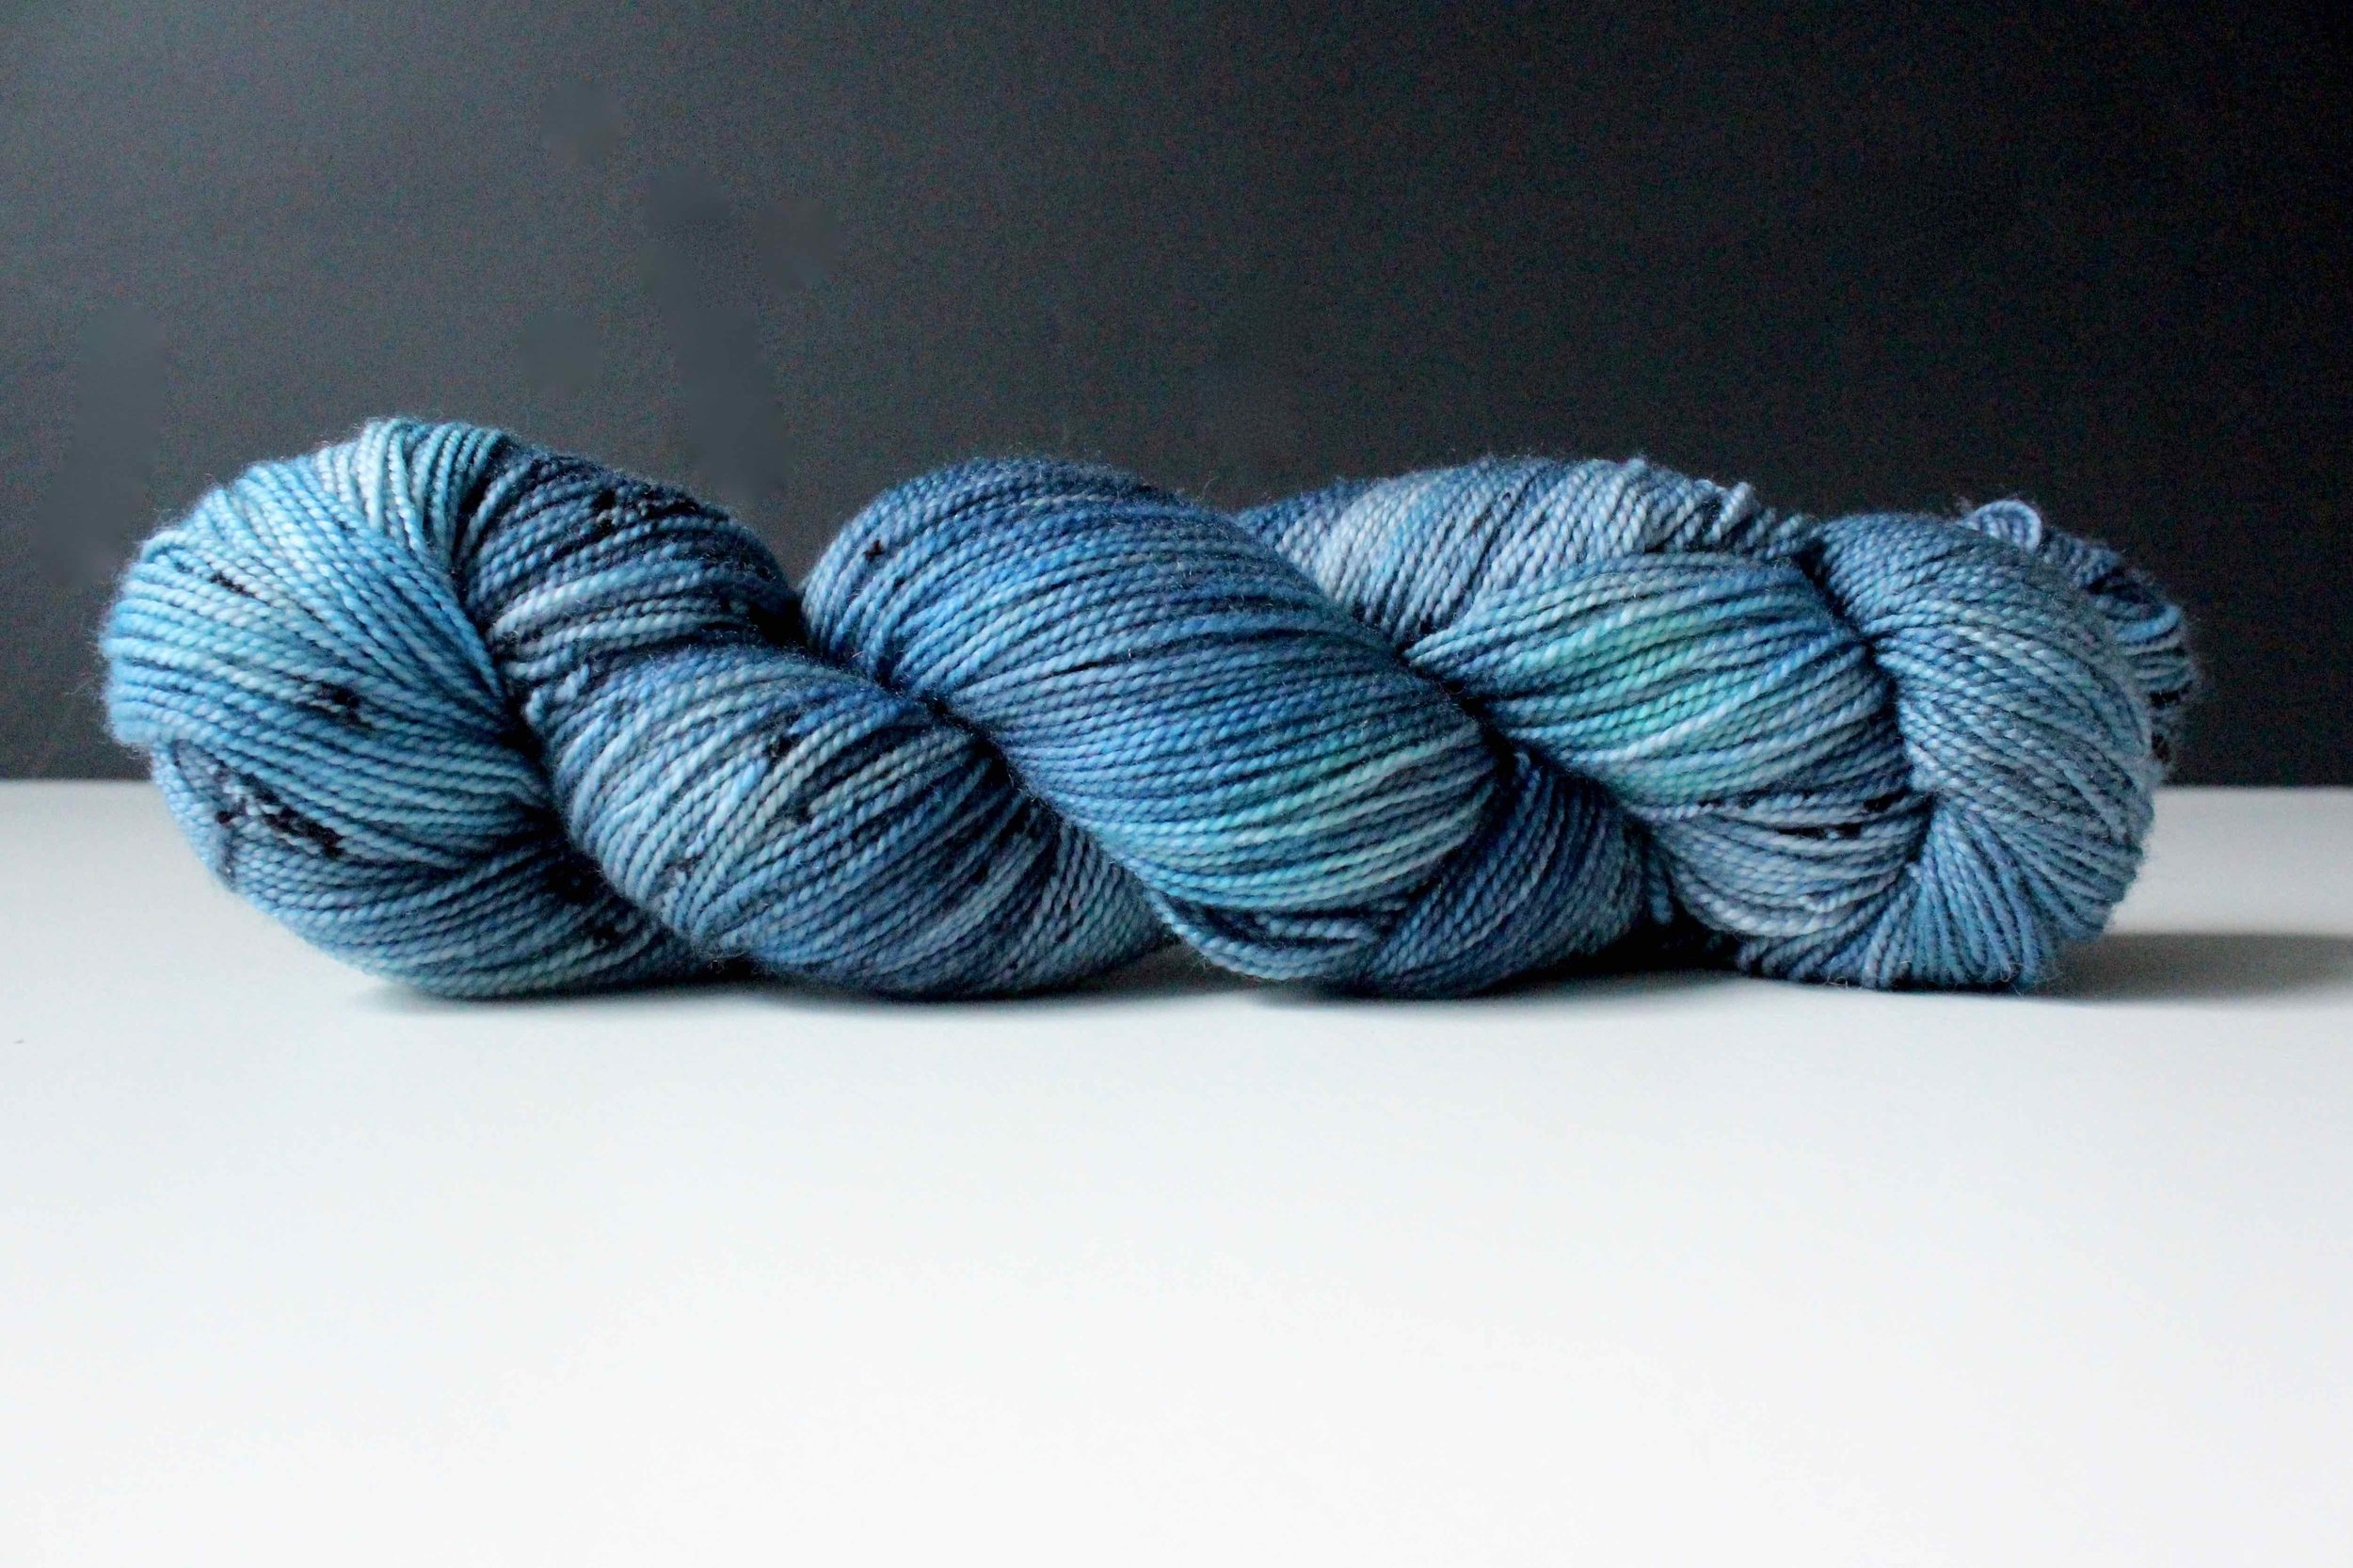 Folklore - Hand dyed sock yarn - grey and moss green speckled assigned